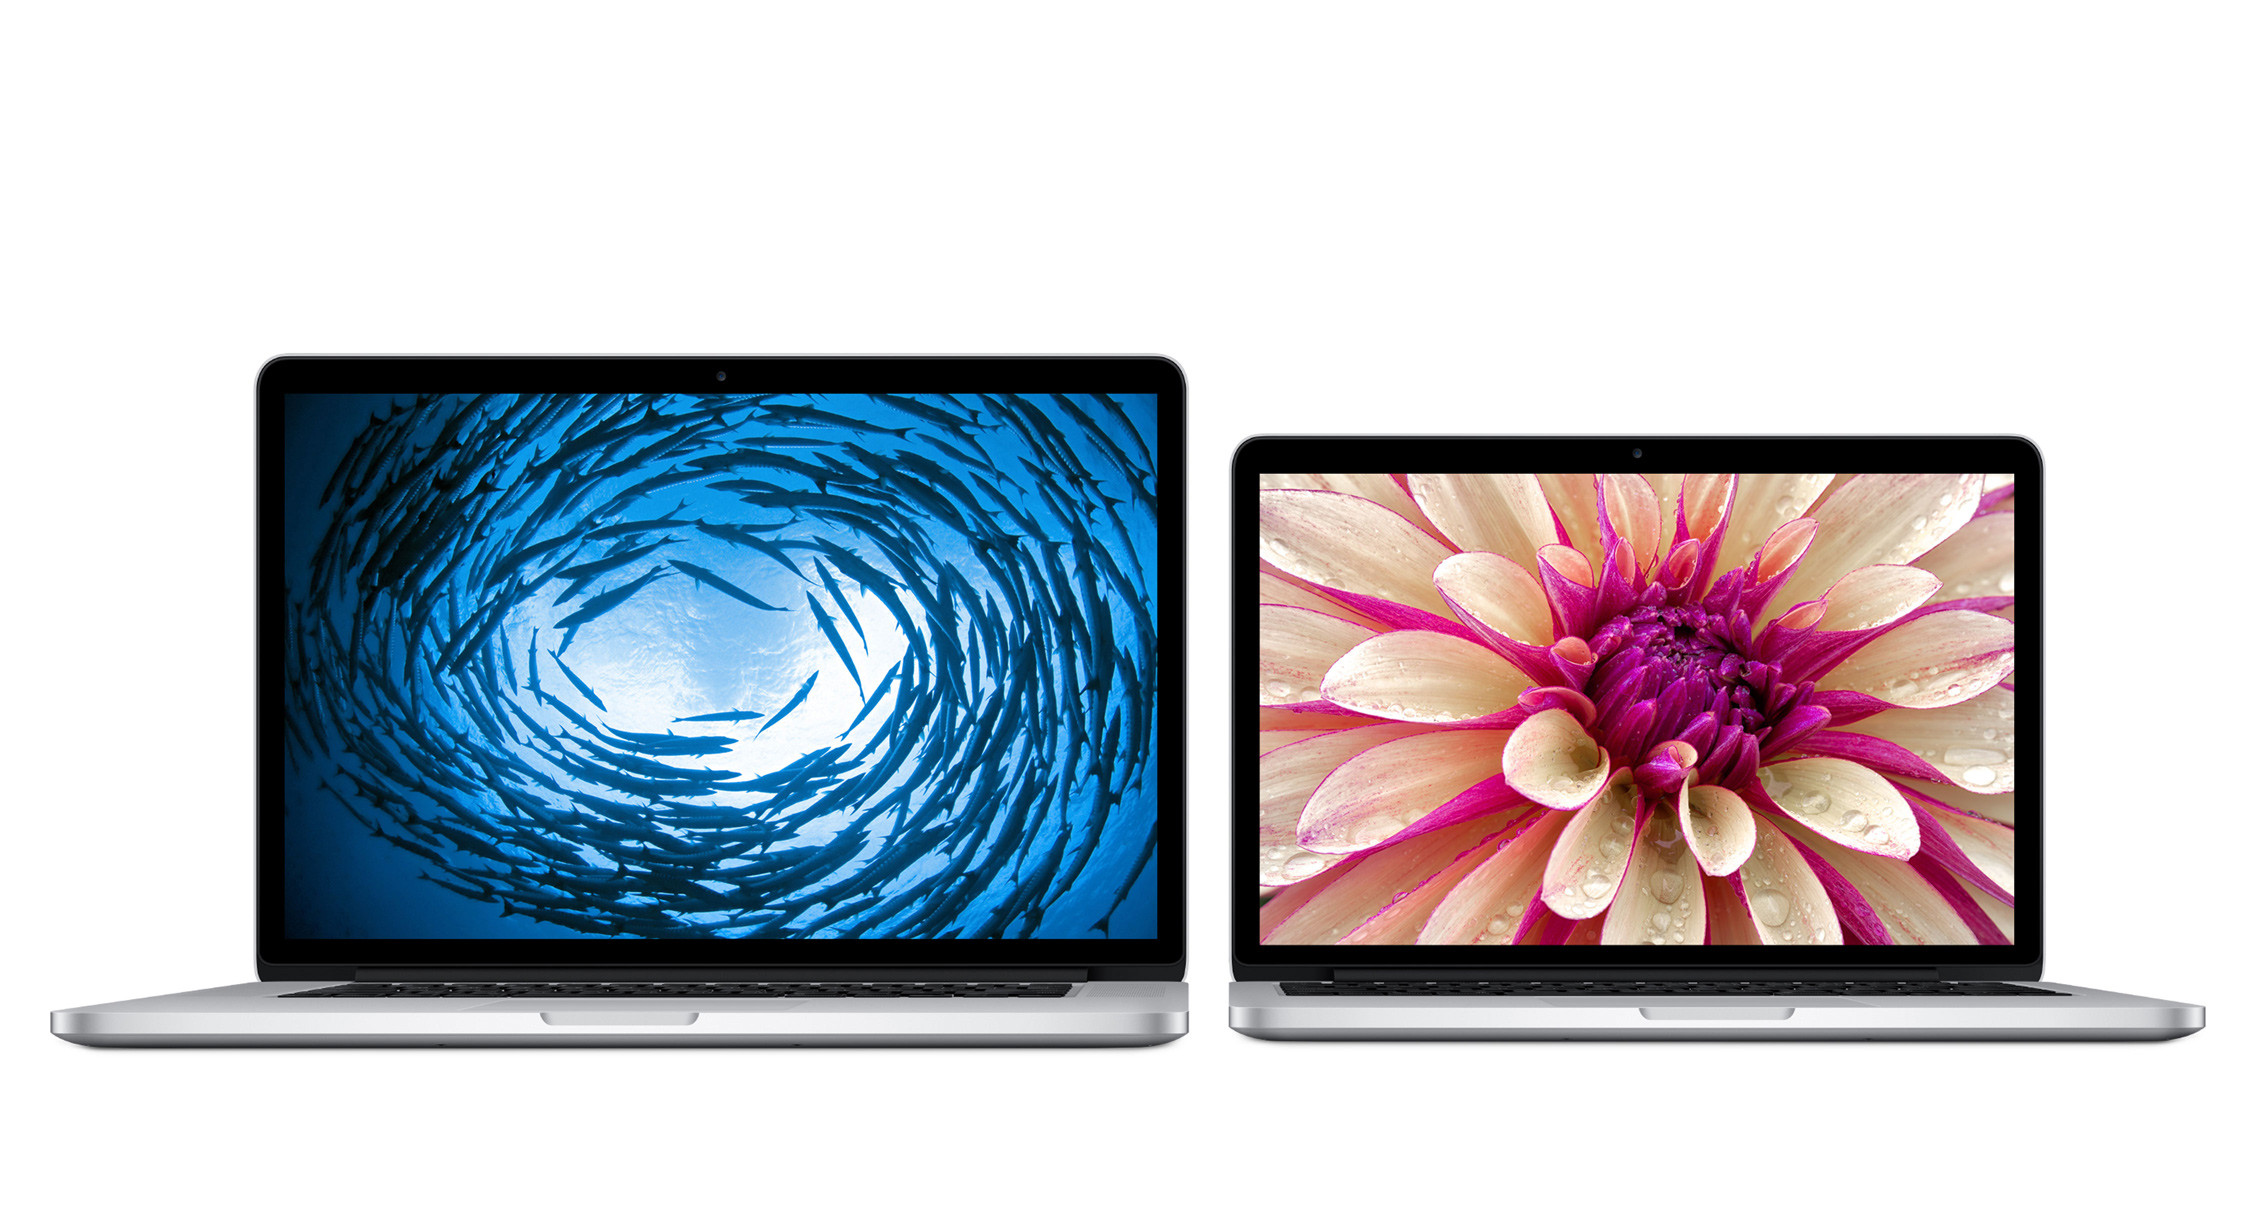 2256x1208 I am wondering if they can be found anywhere, especially the 15" MBP blue  wallpaper. They look quite amazing as is always the case with Apple.